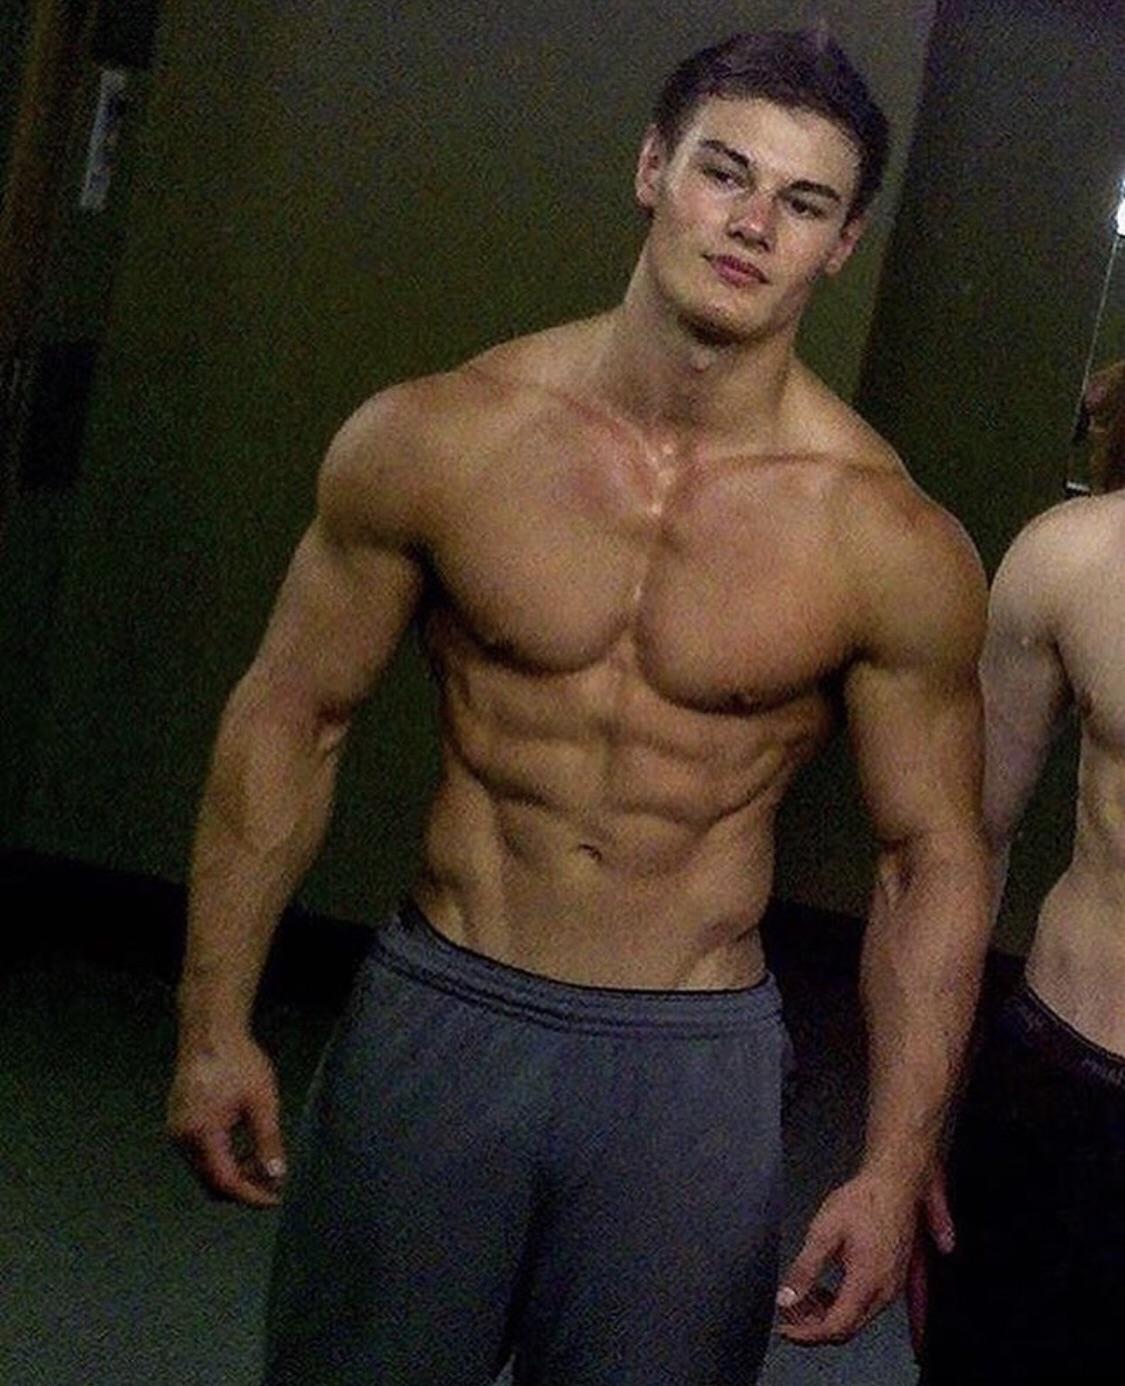 Jeff Seid at 16 - Was he natural back then? : nattyorjuice